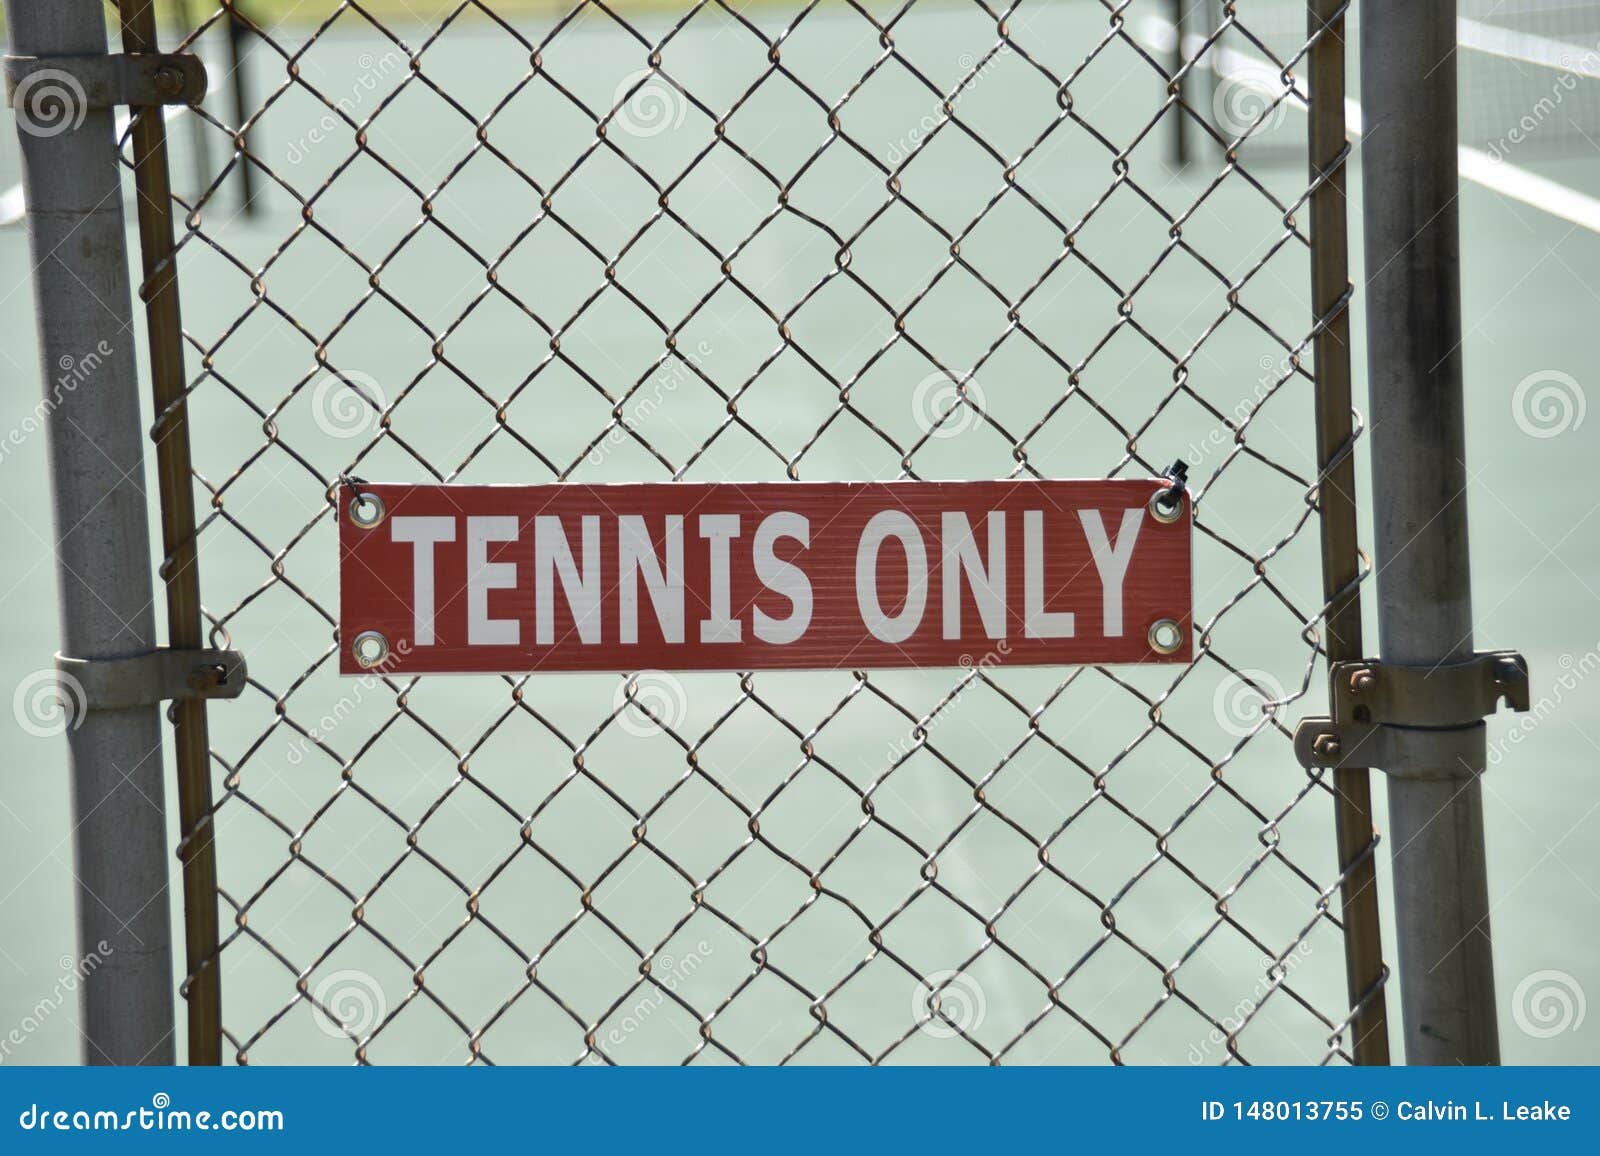 tennis court for singles or doubles play